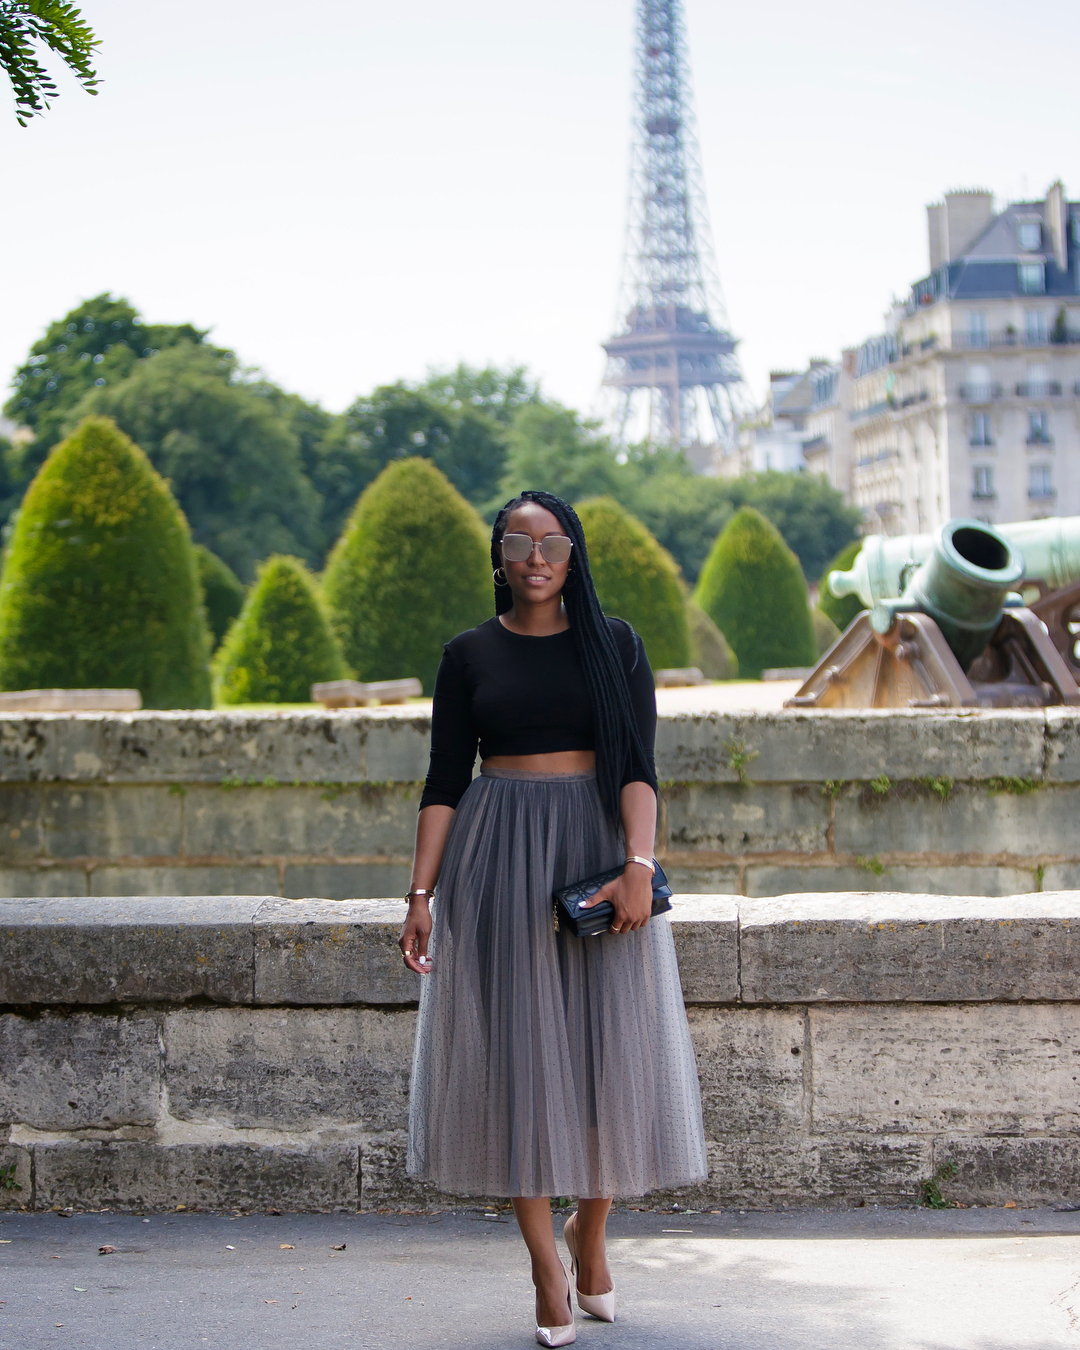 Classy Chic! SHIONA TURINI Is Definitely The Queen Of Crop Tops